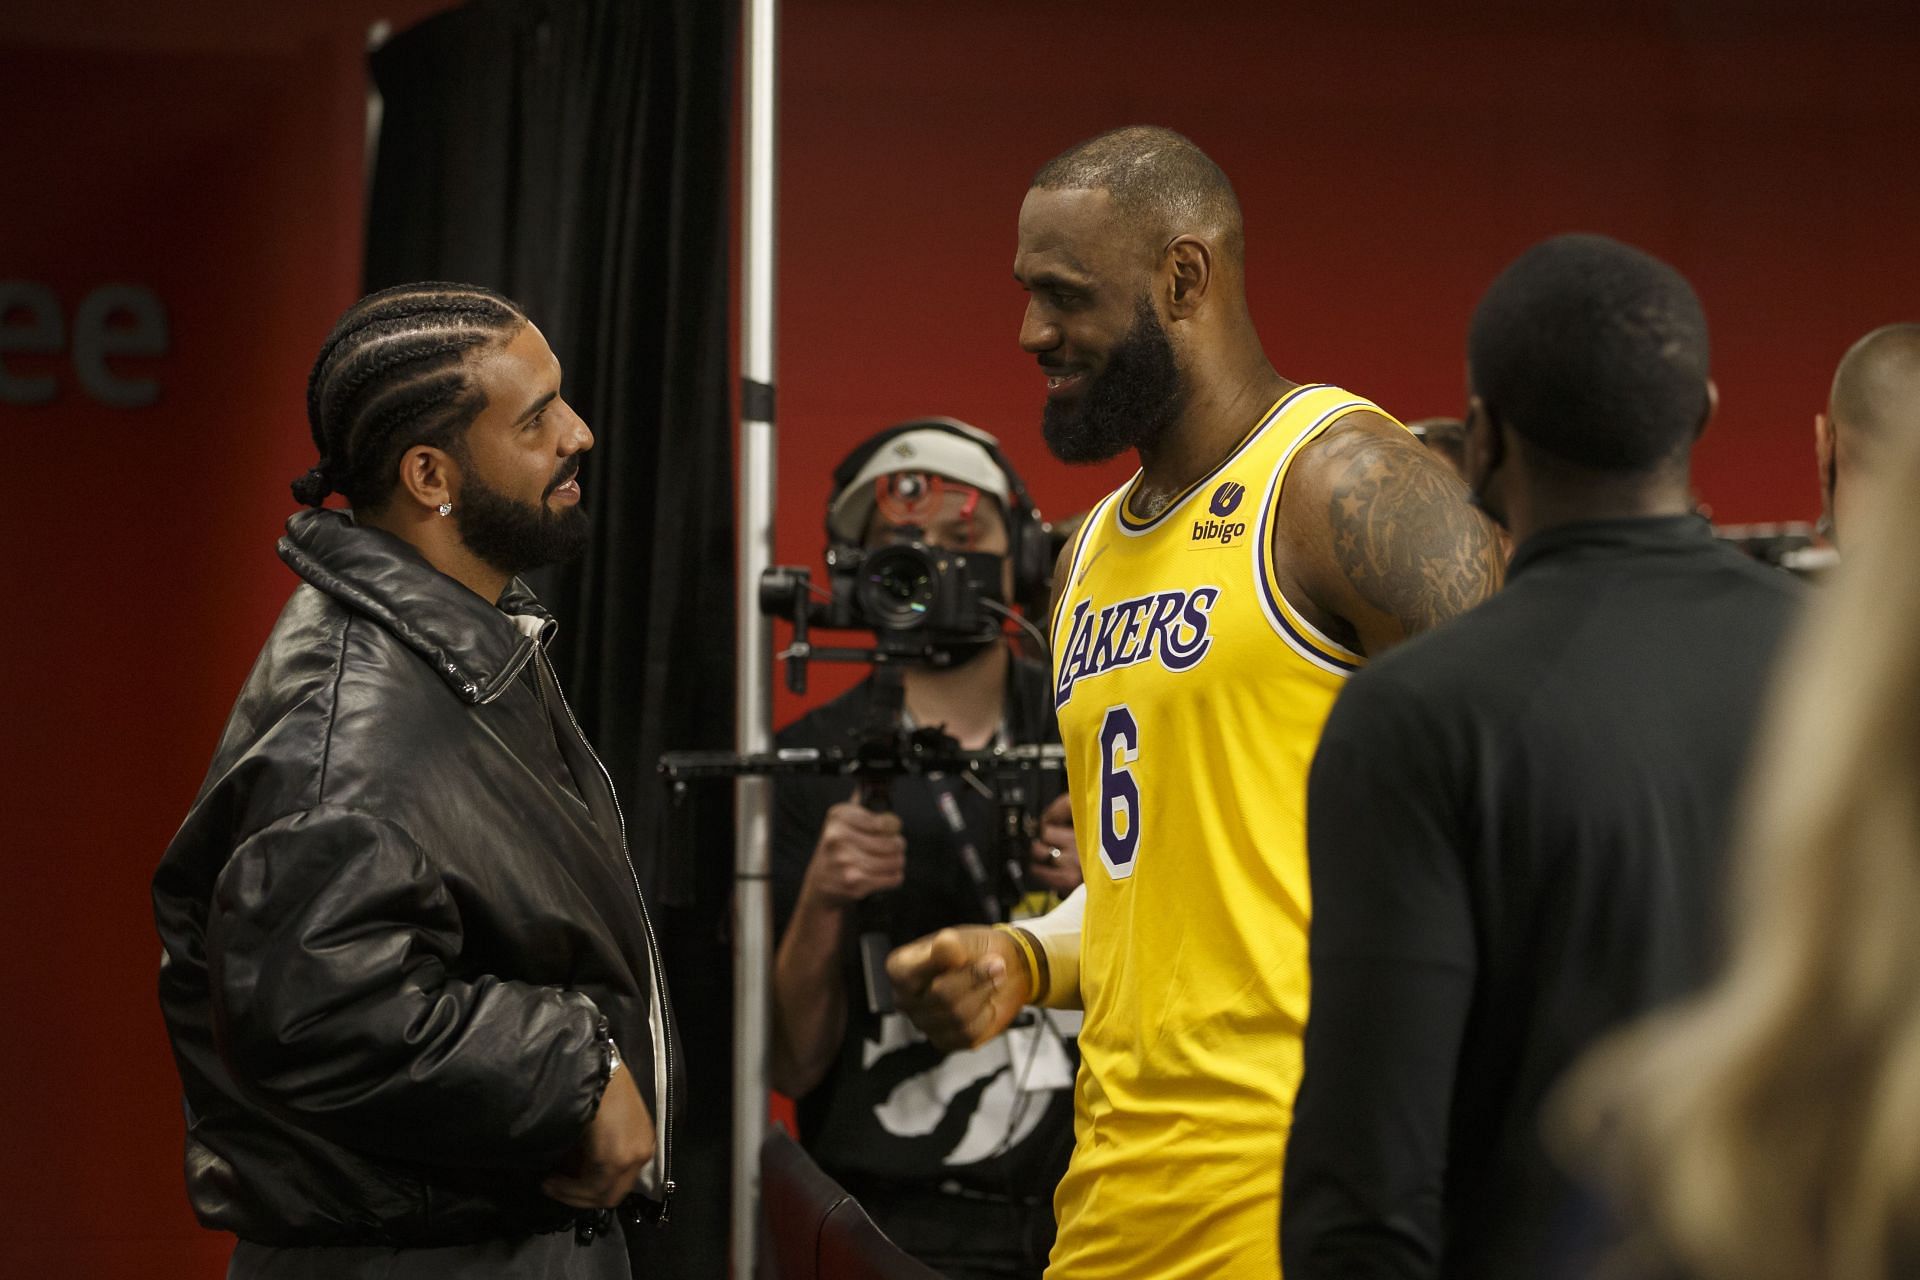 Drake in conversation with LeBron James